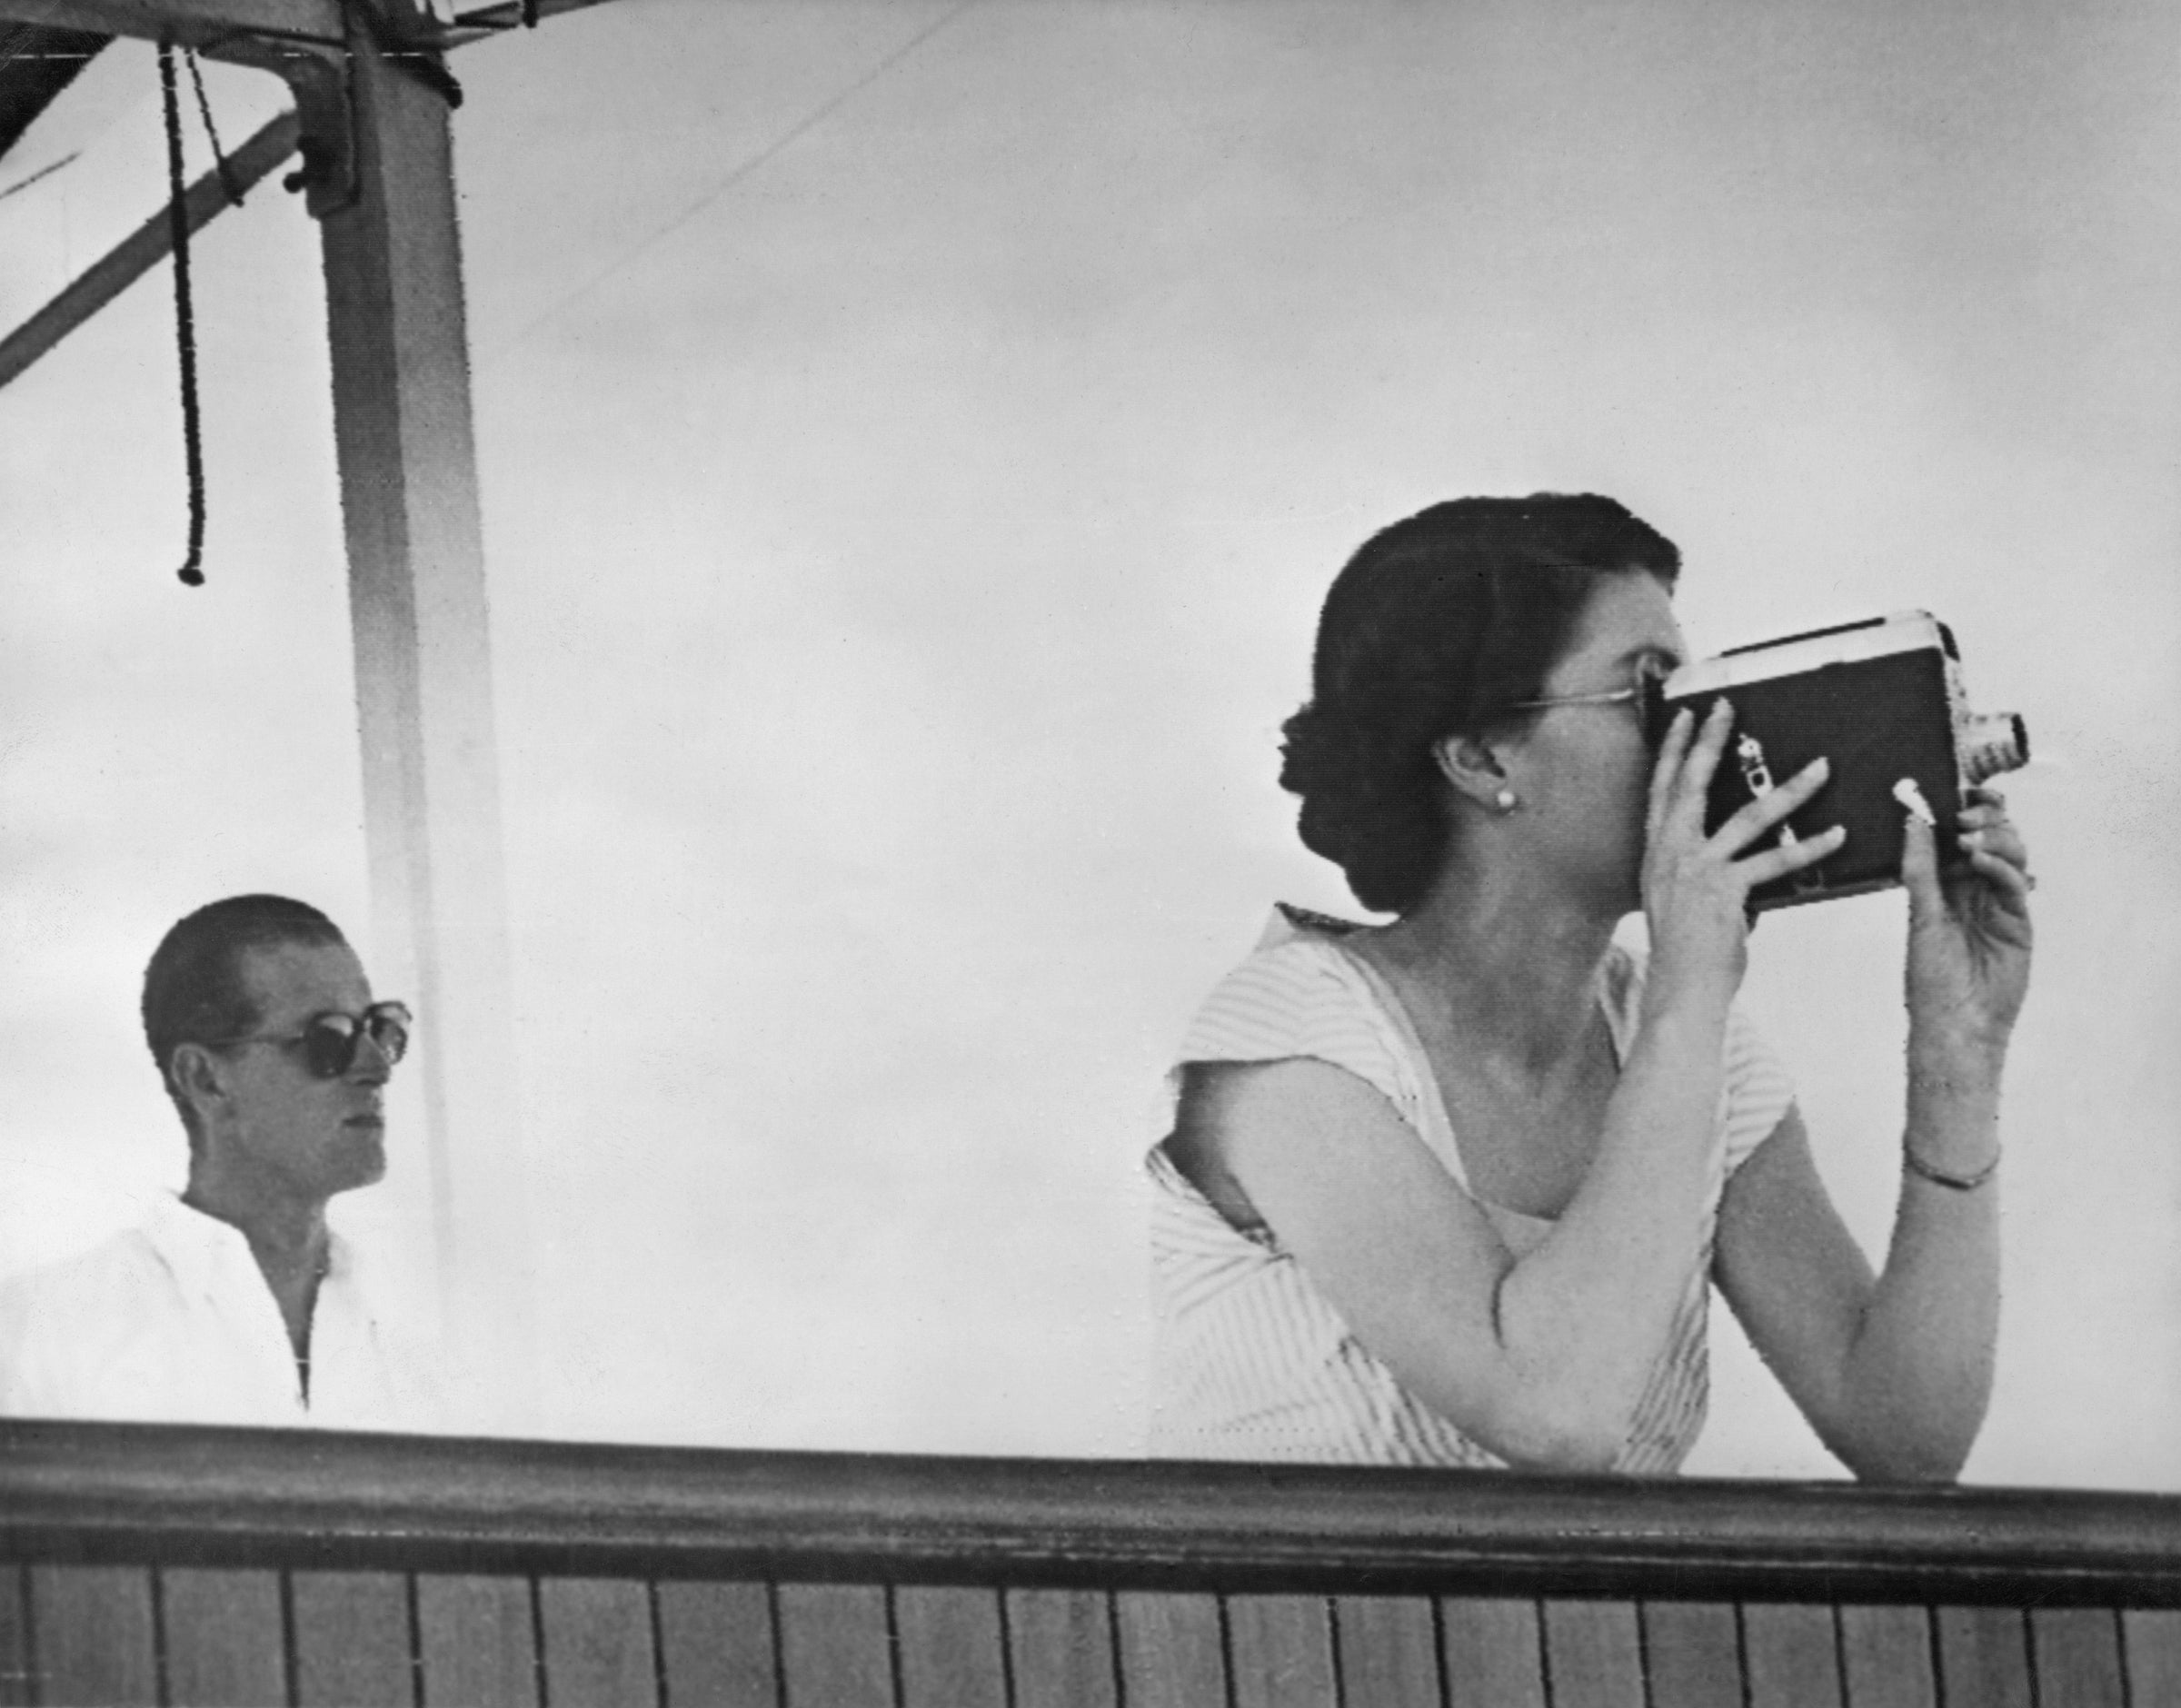 Queen Elizabeth II filming the arrival of the escort ship HMNZS Black Prince, while in the South Pacific en route to Fiji, aboard the SS Gothic during the coronation world tour, 11th December 1953.